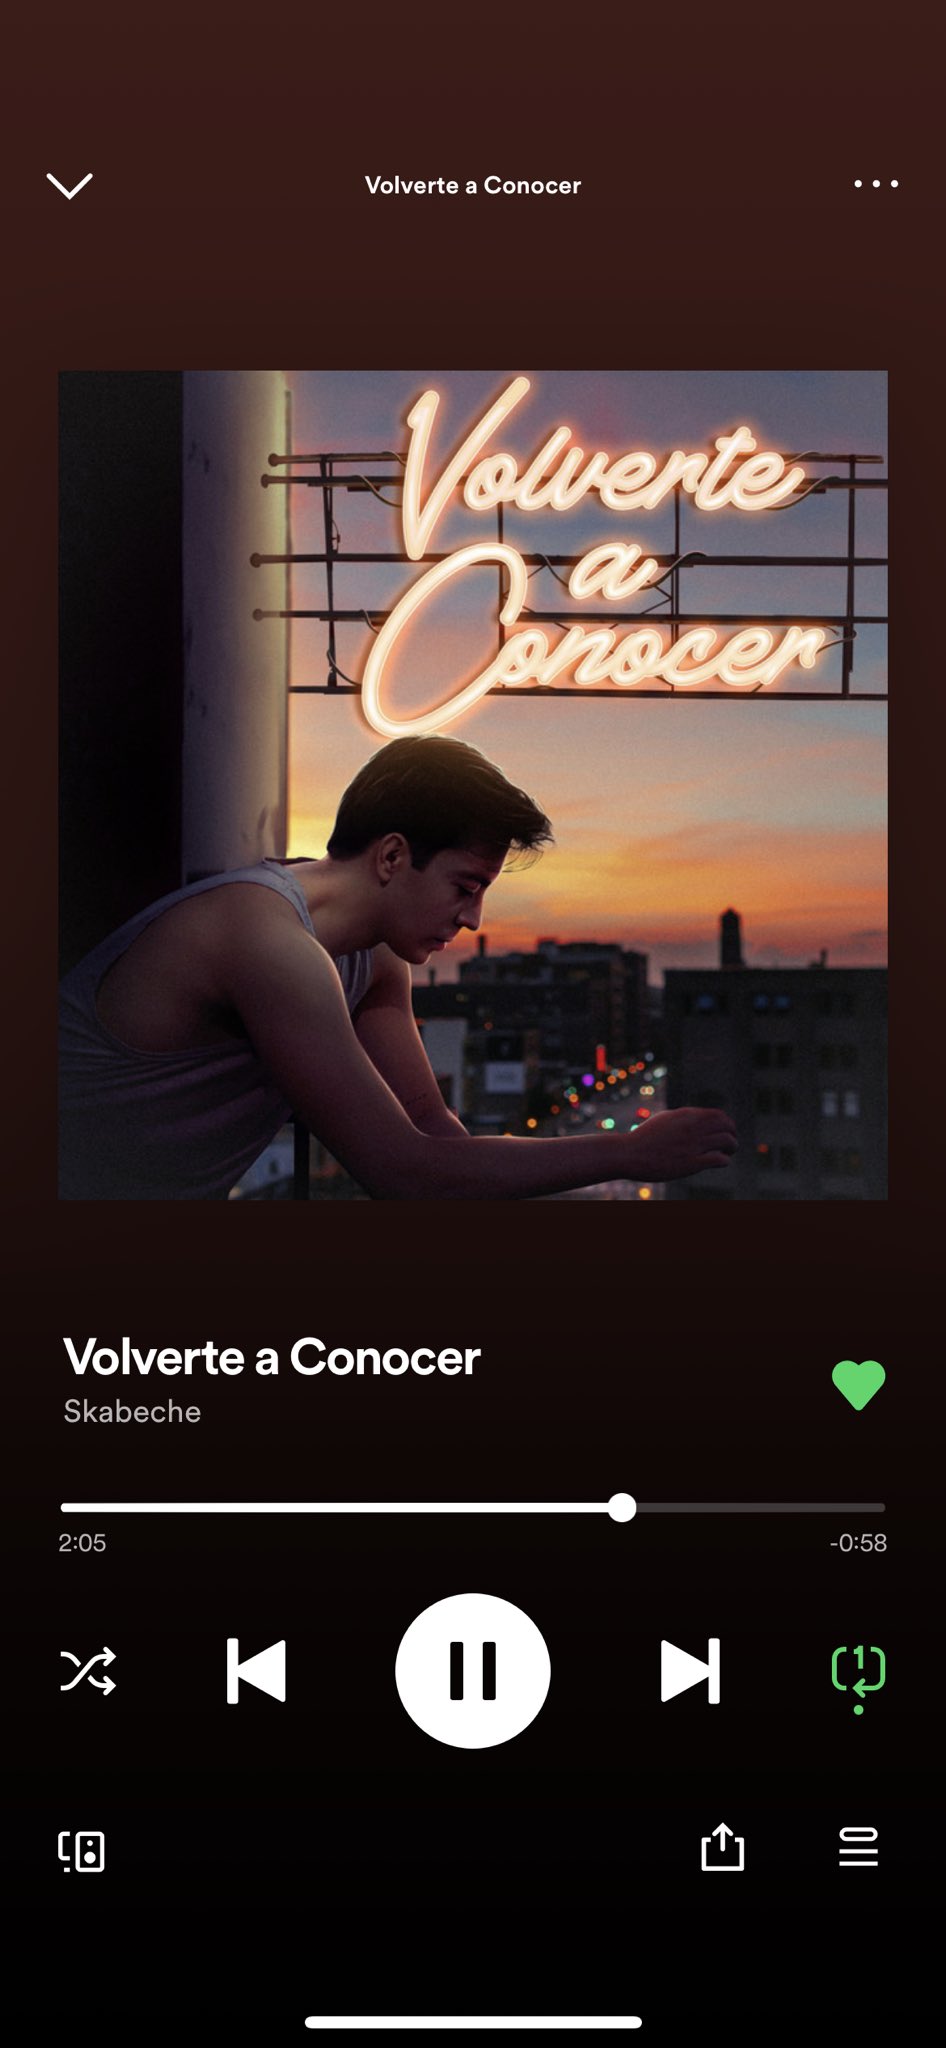 VOLVERTE A CONOCER OUT NOW Twitter